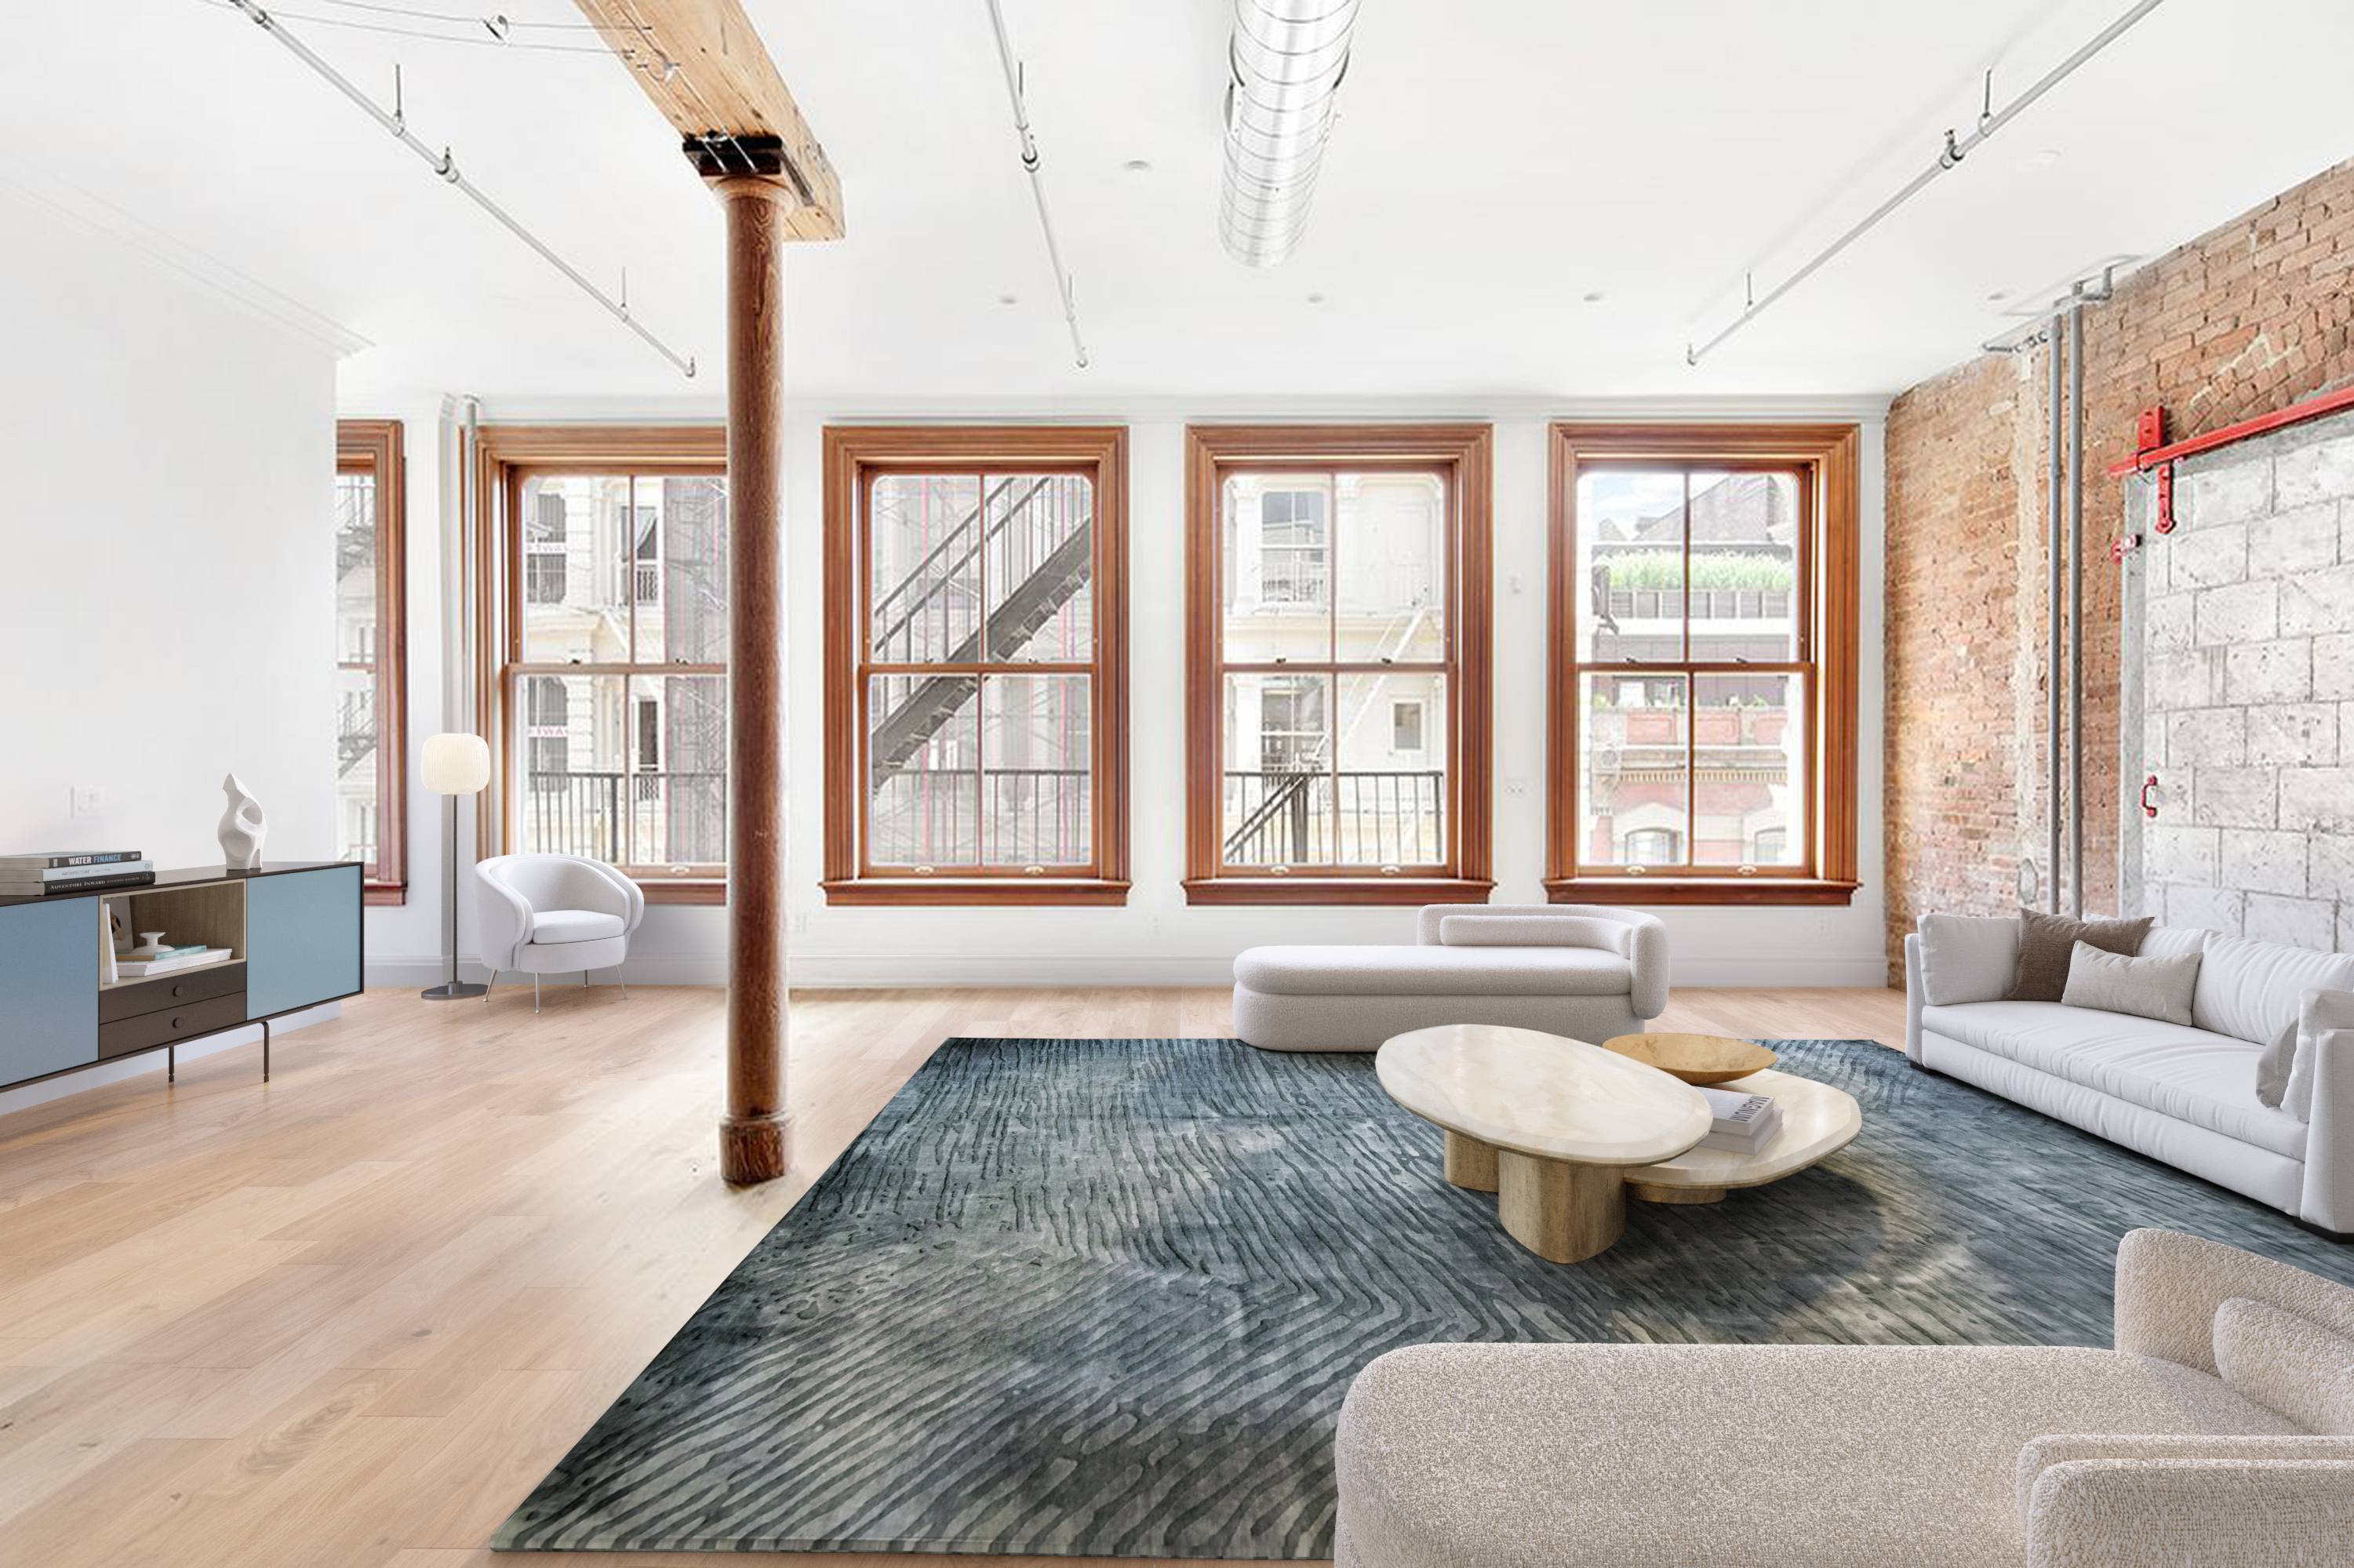 The second floor of 73 Greene Street is an exquisite and authentic 2, 900 square foot, 3 bed and 3.